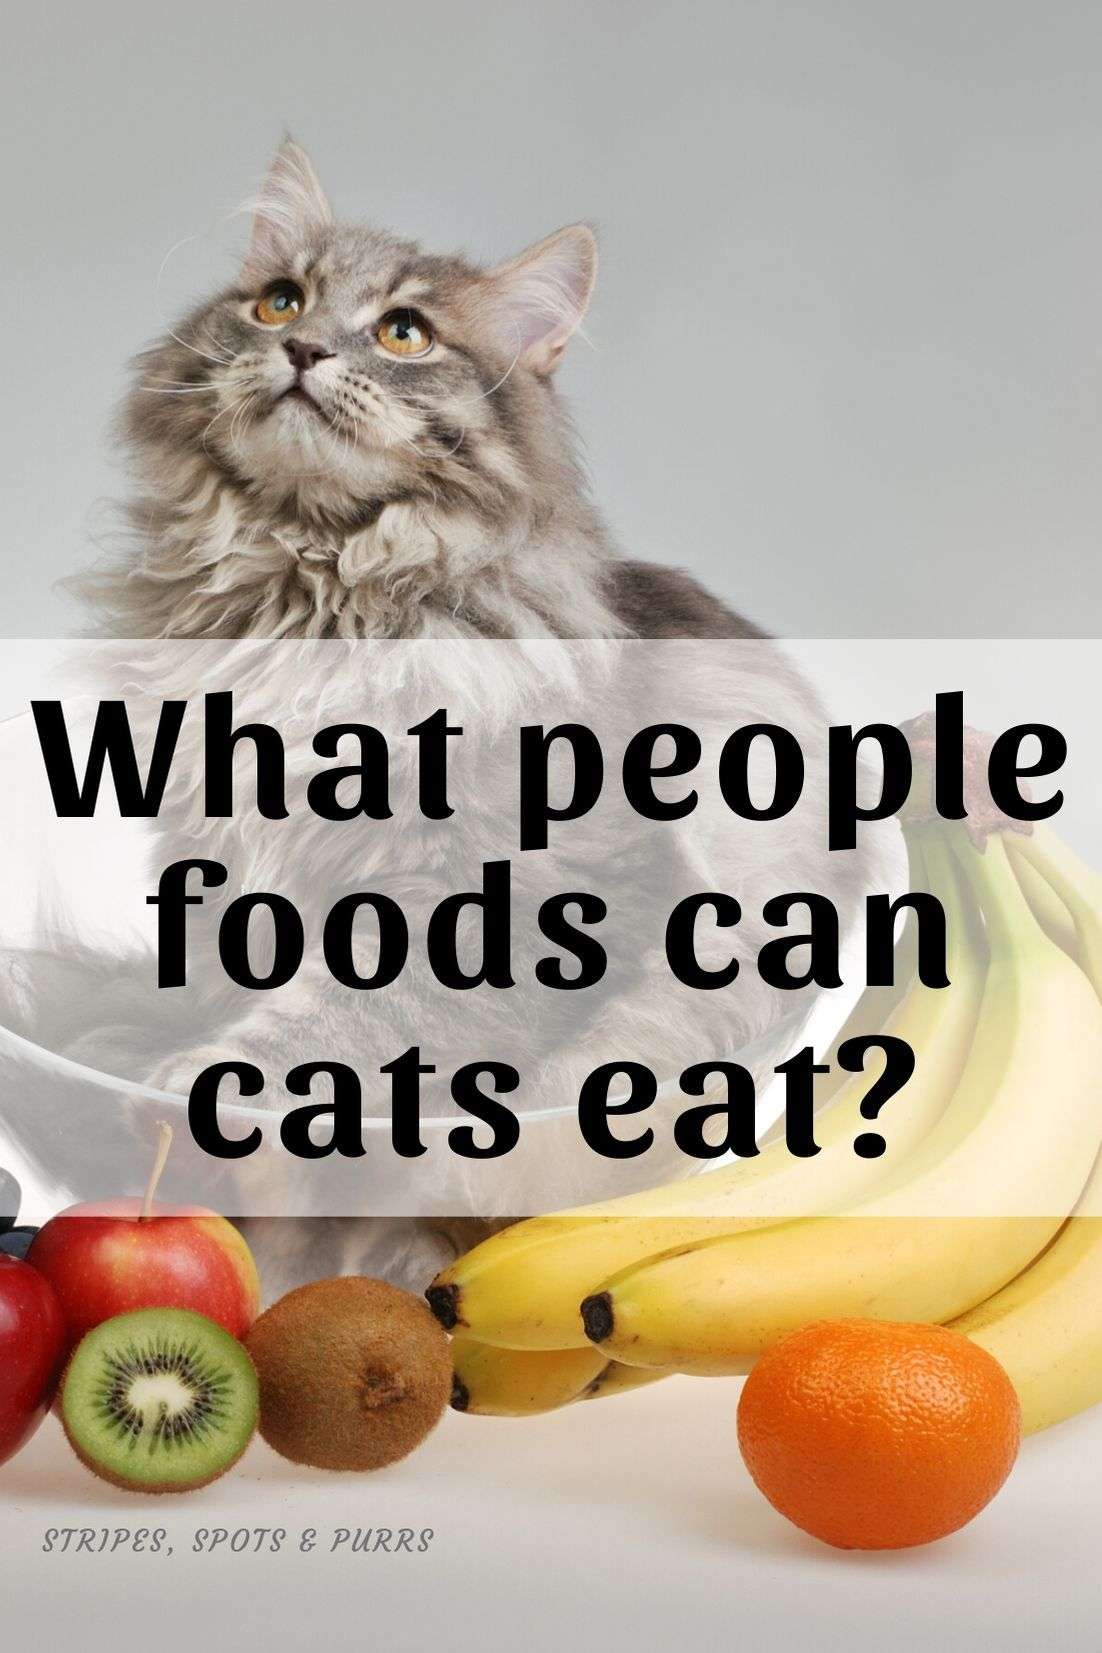 What people food can cats eat? Cat